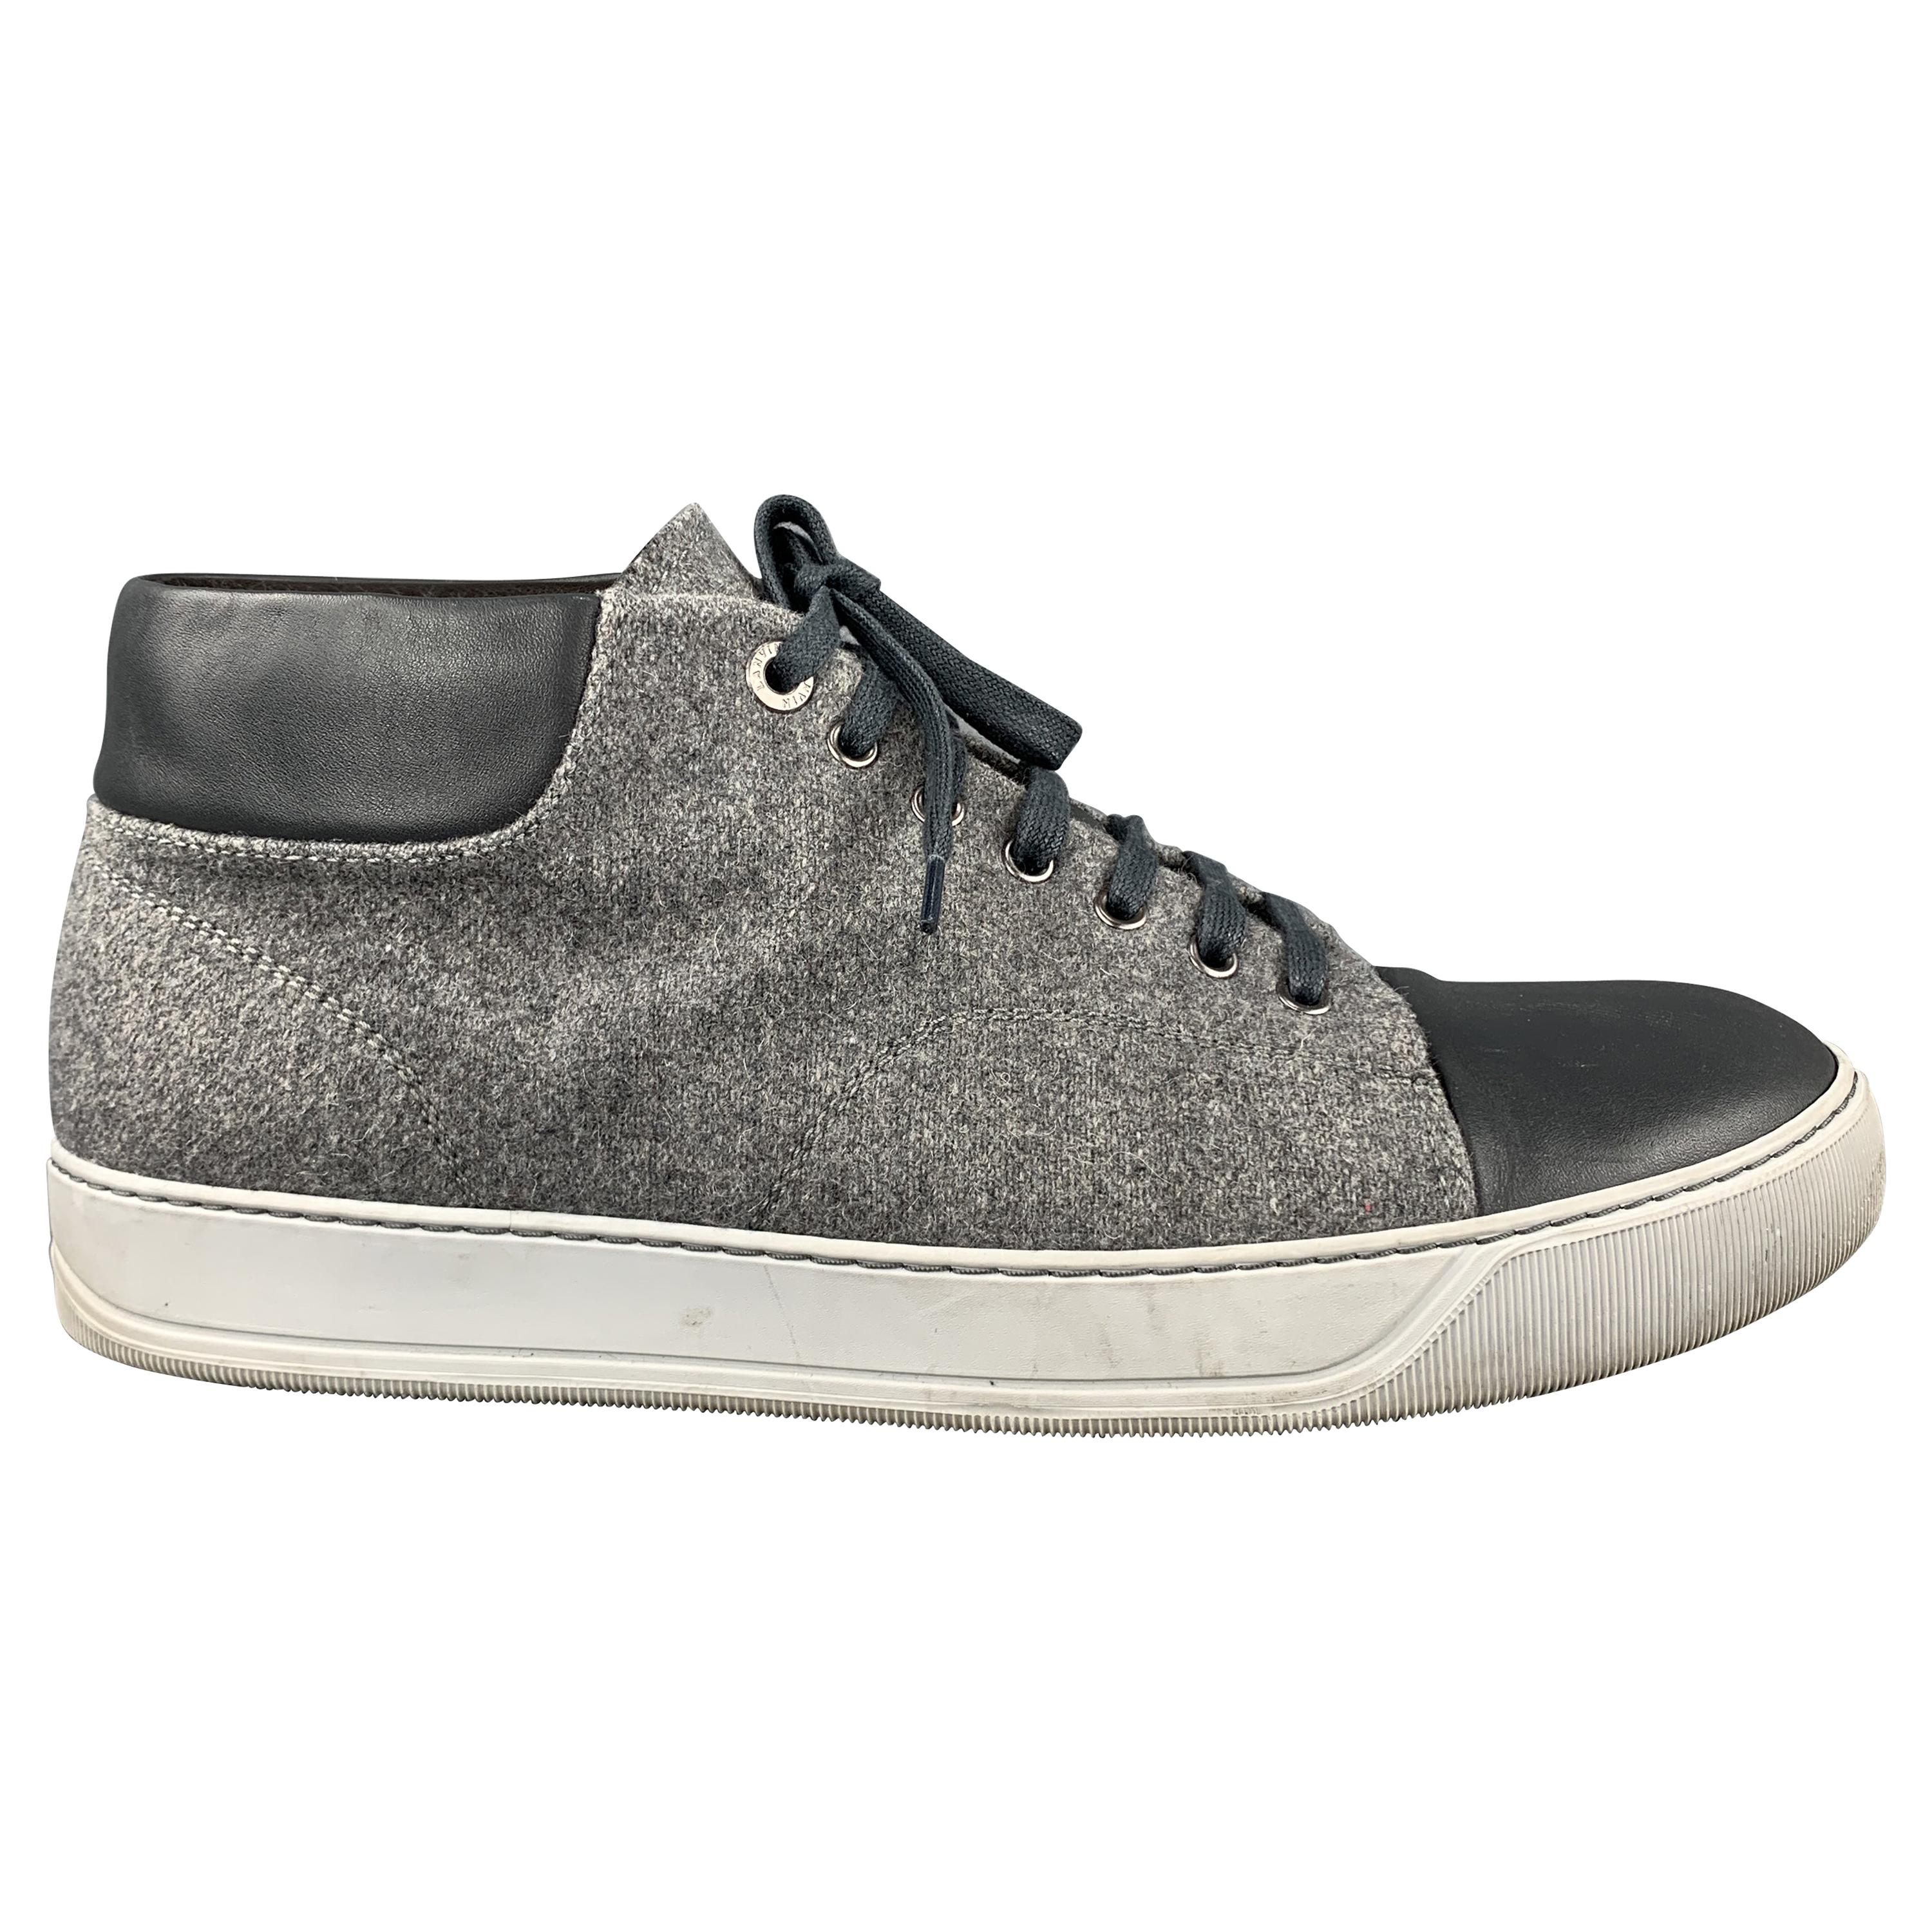 LANVIN Size 11 Gray Wool Lace Up Leather Cap Toe Sneakers